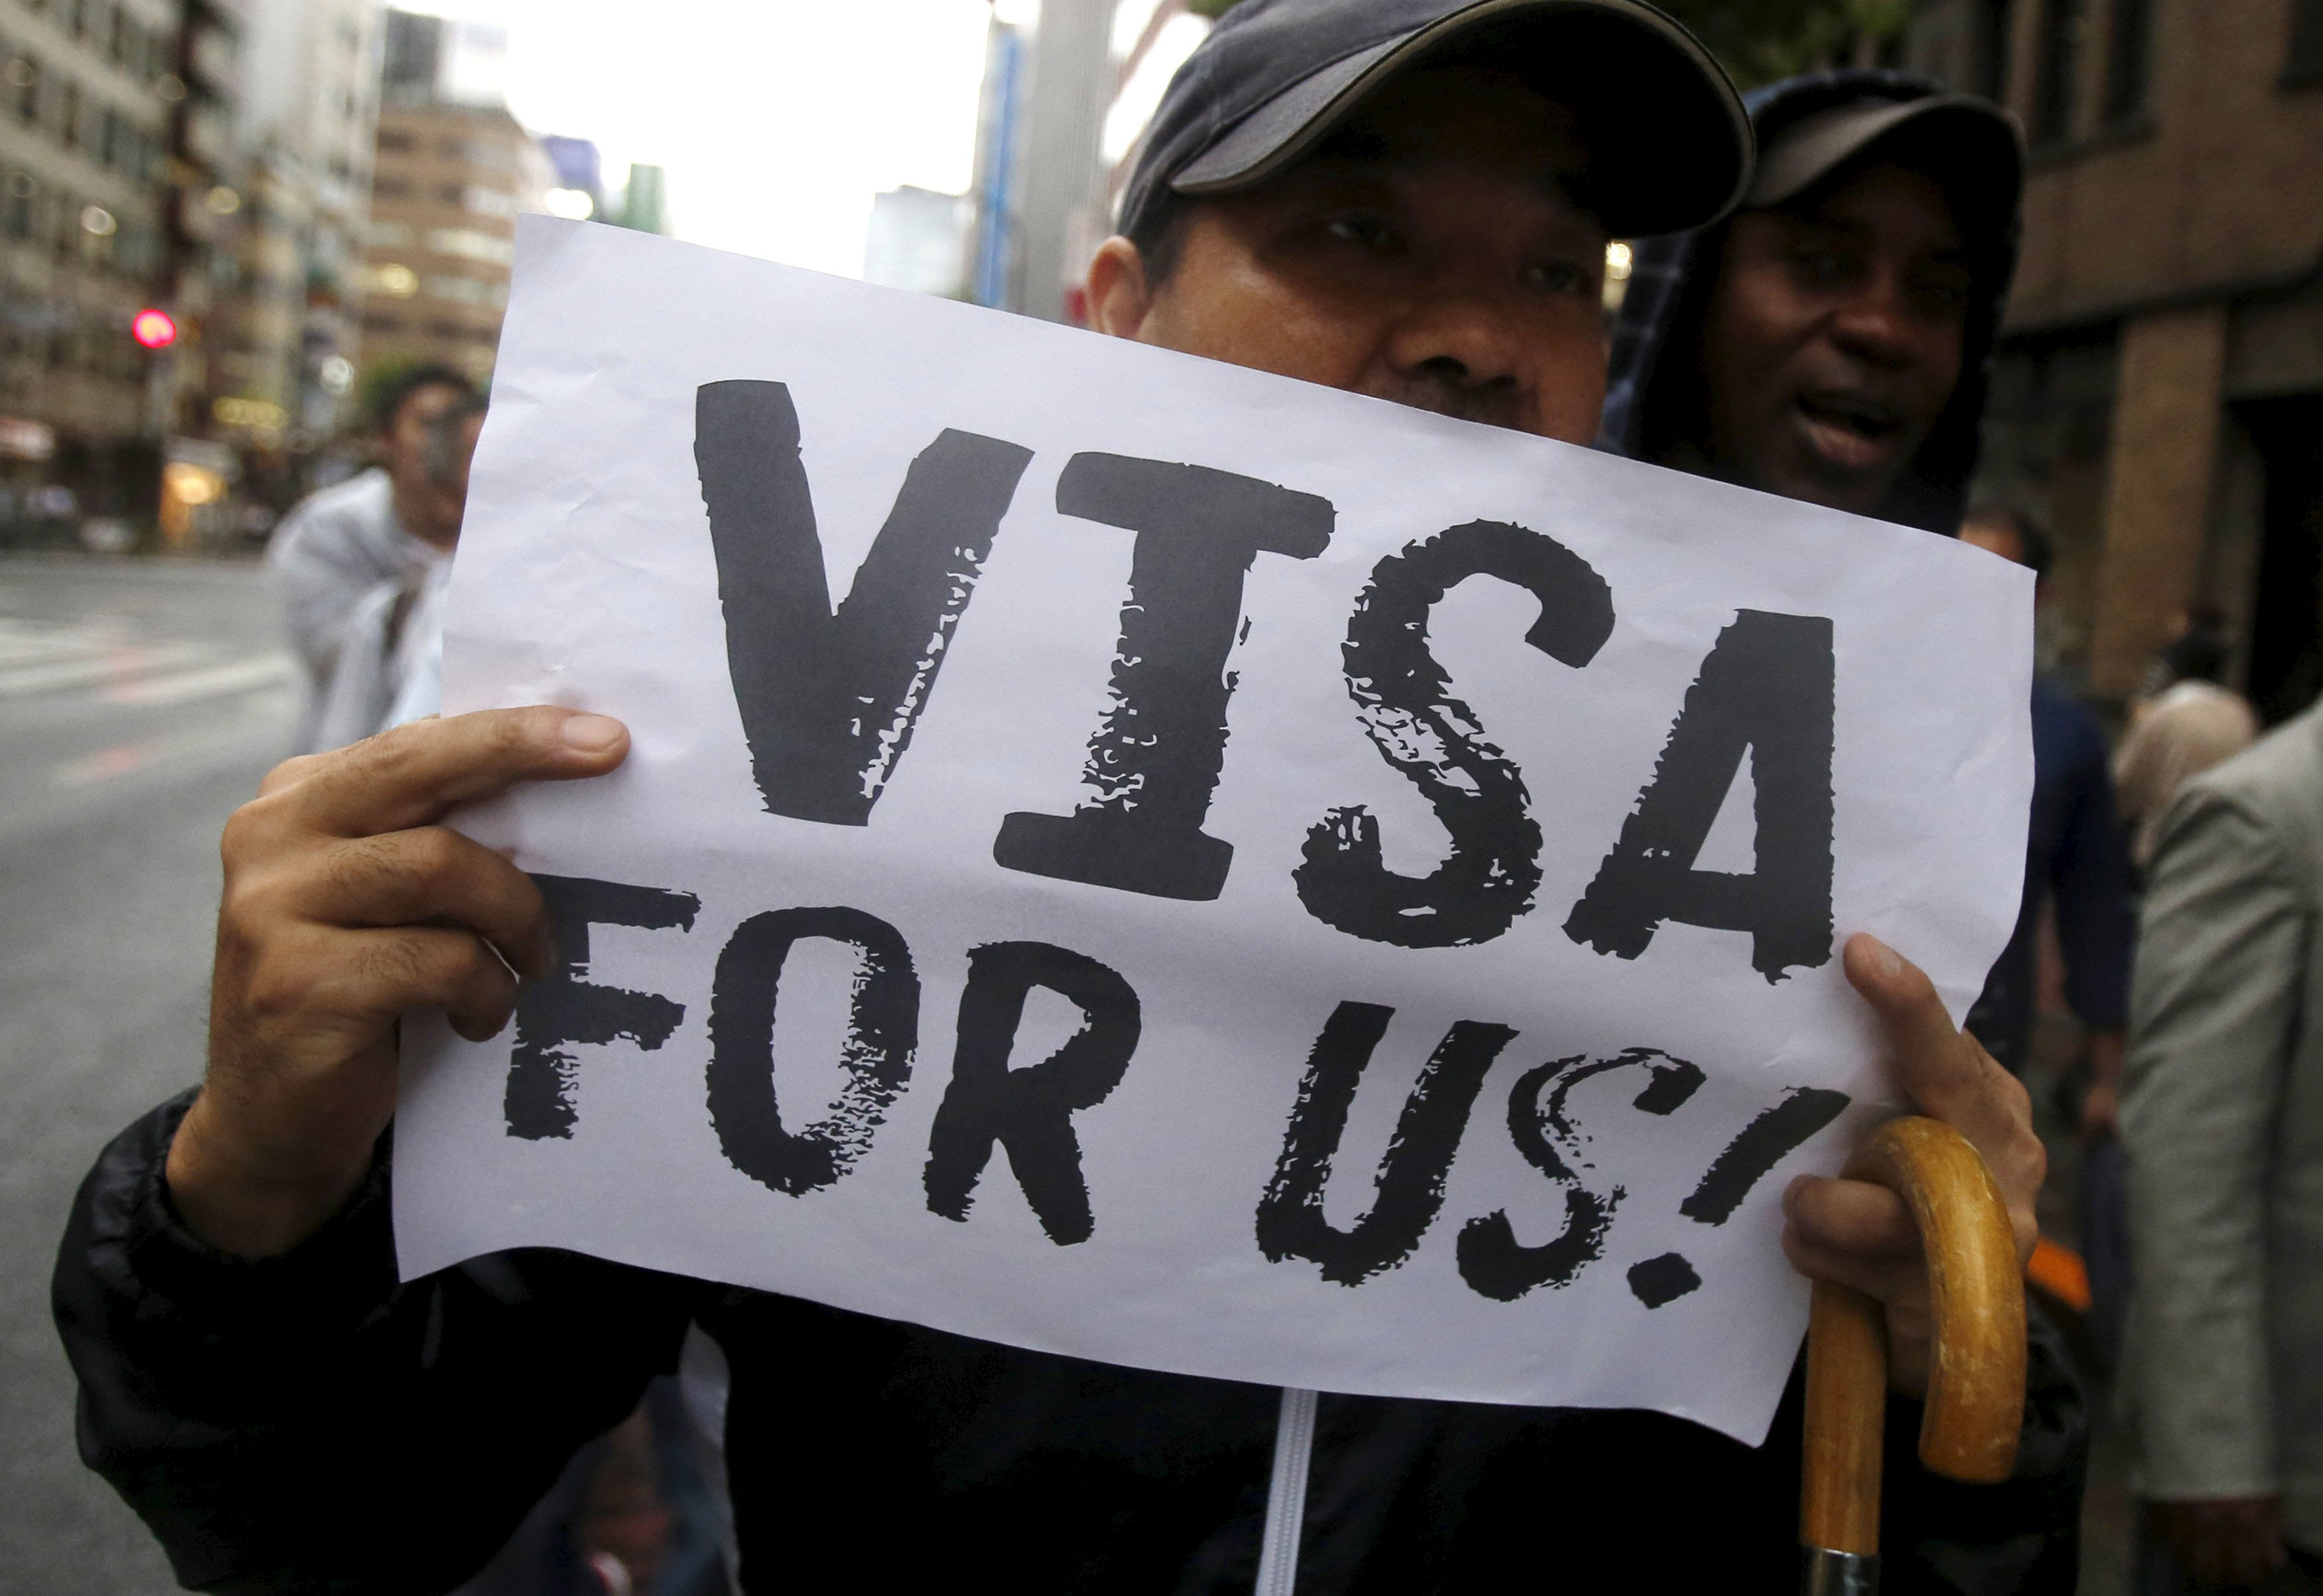 Protesters call on Japan to give asylum seekers visas, on Wednesday in central Tokyo. | REUTERS